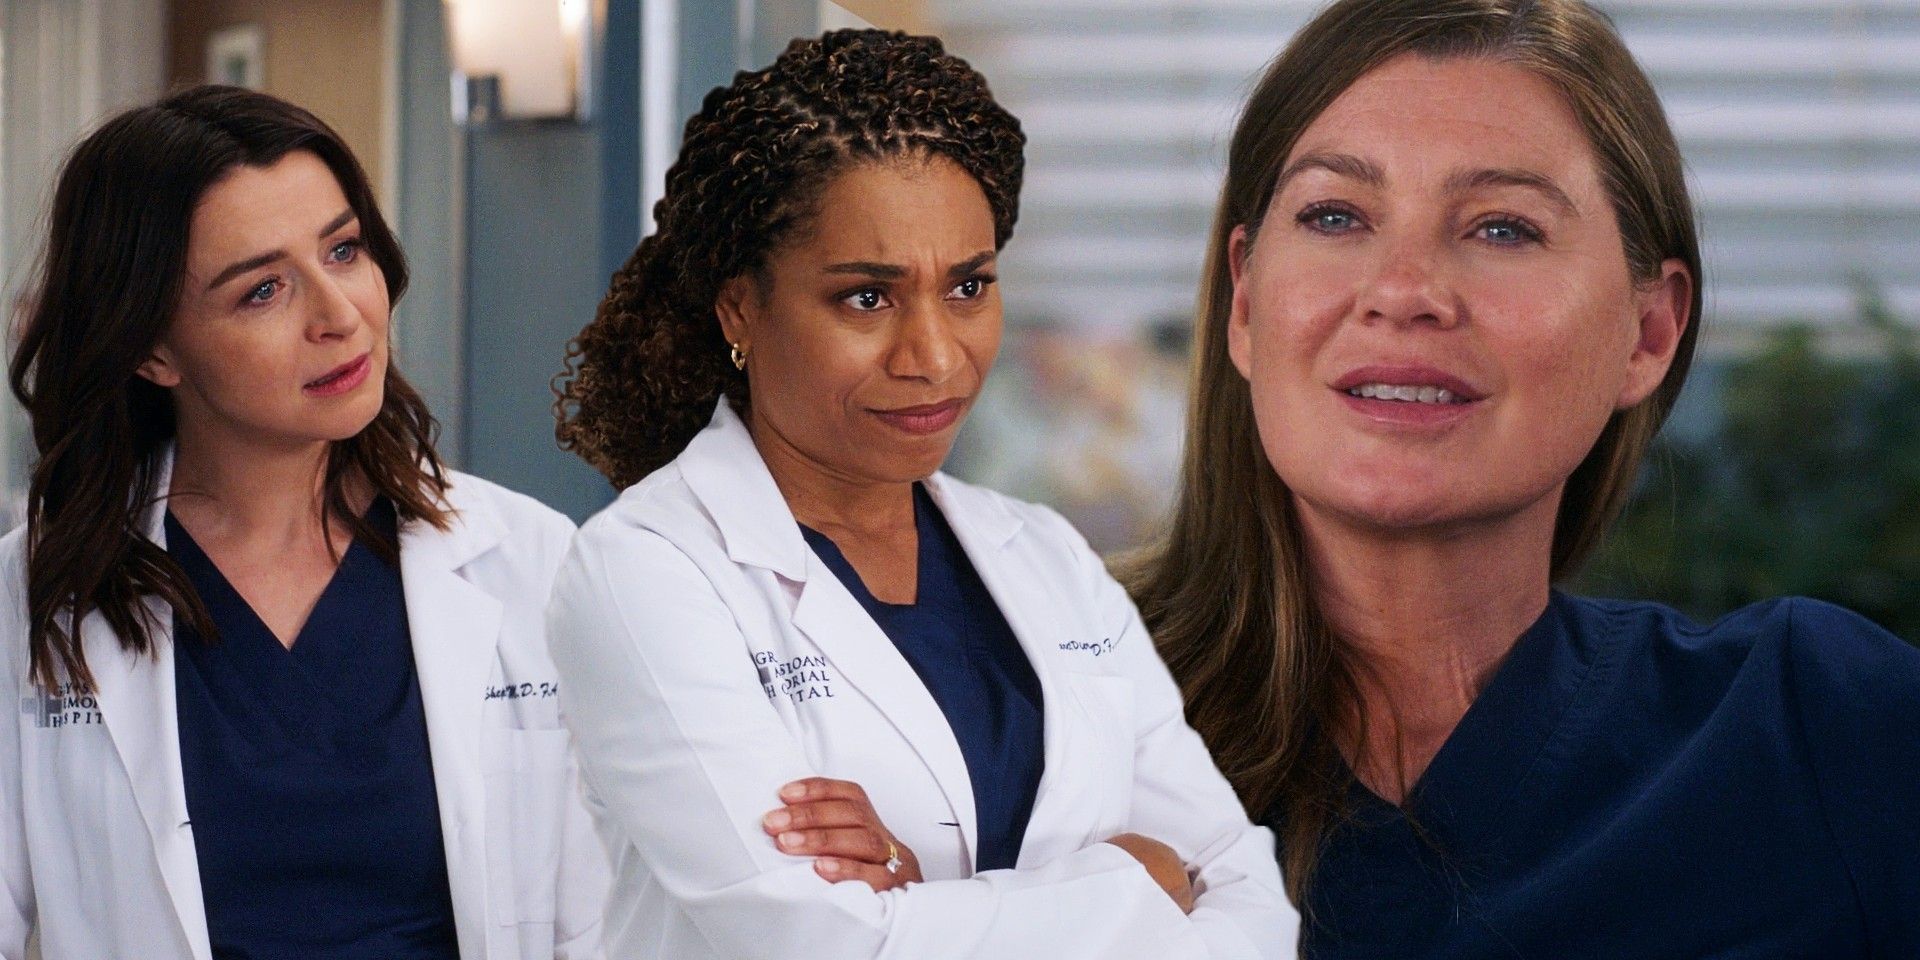 Caterina Scorsone as Amelia, Kelly McCreary as Maggie and Ellen Pompeo as Meredith in Grey's Anatomy.